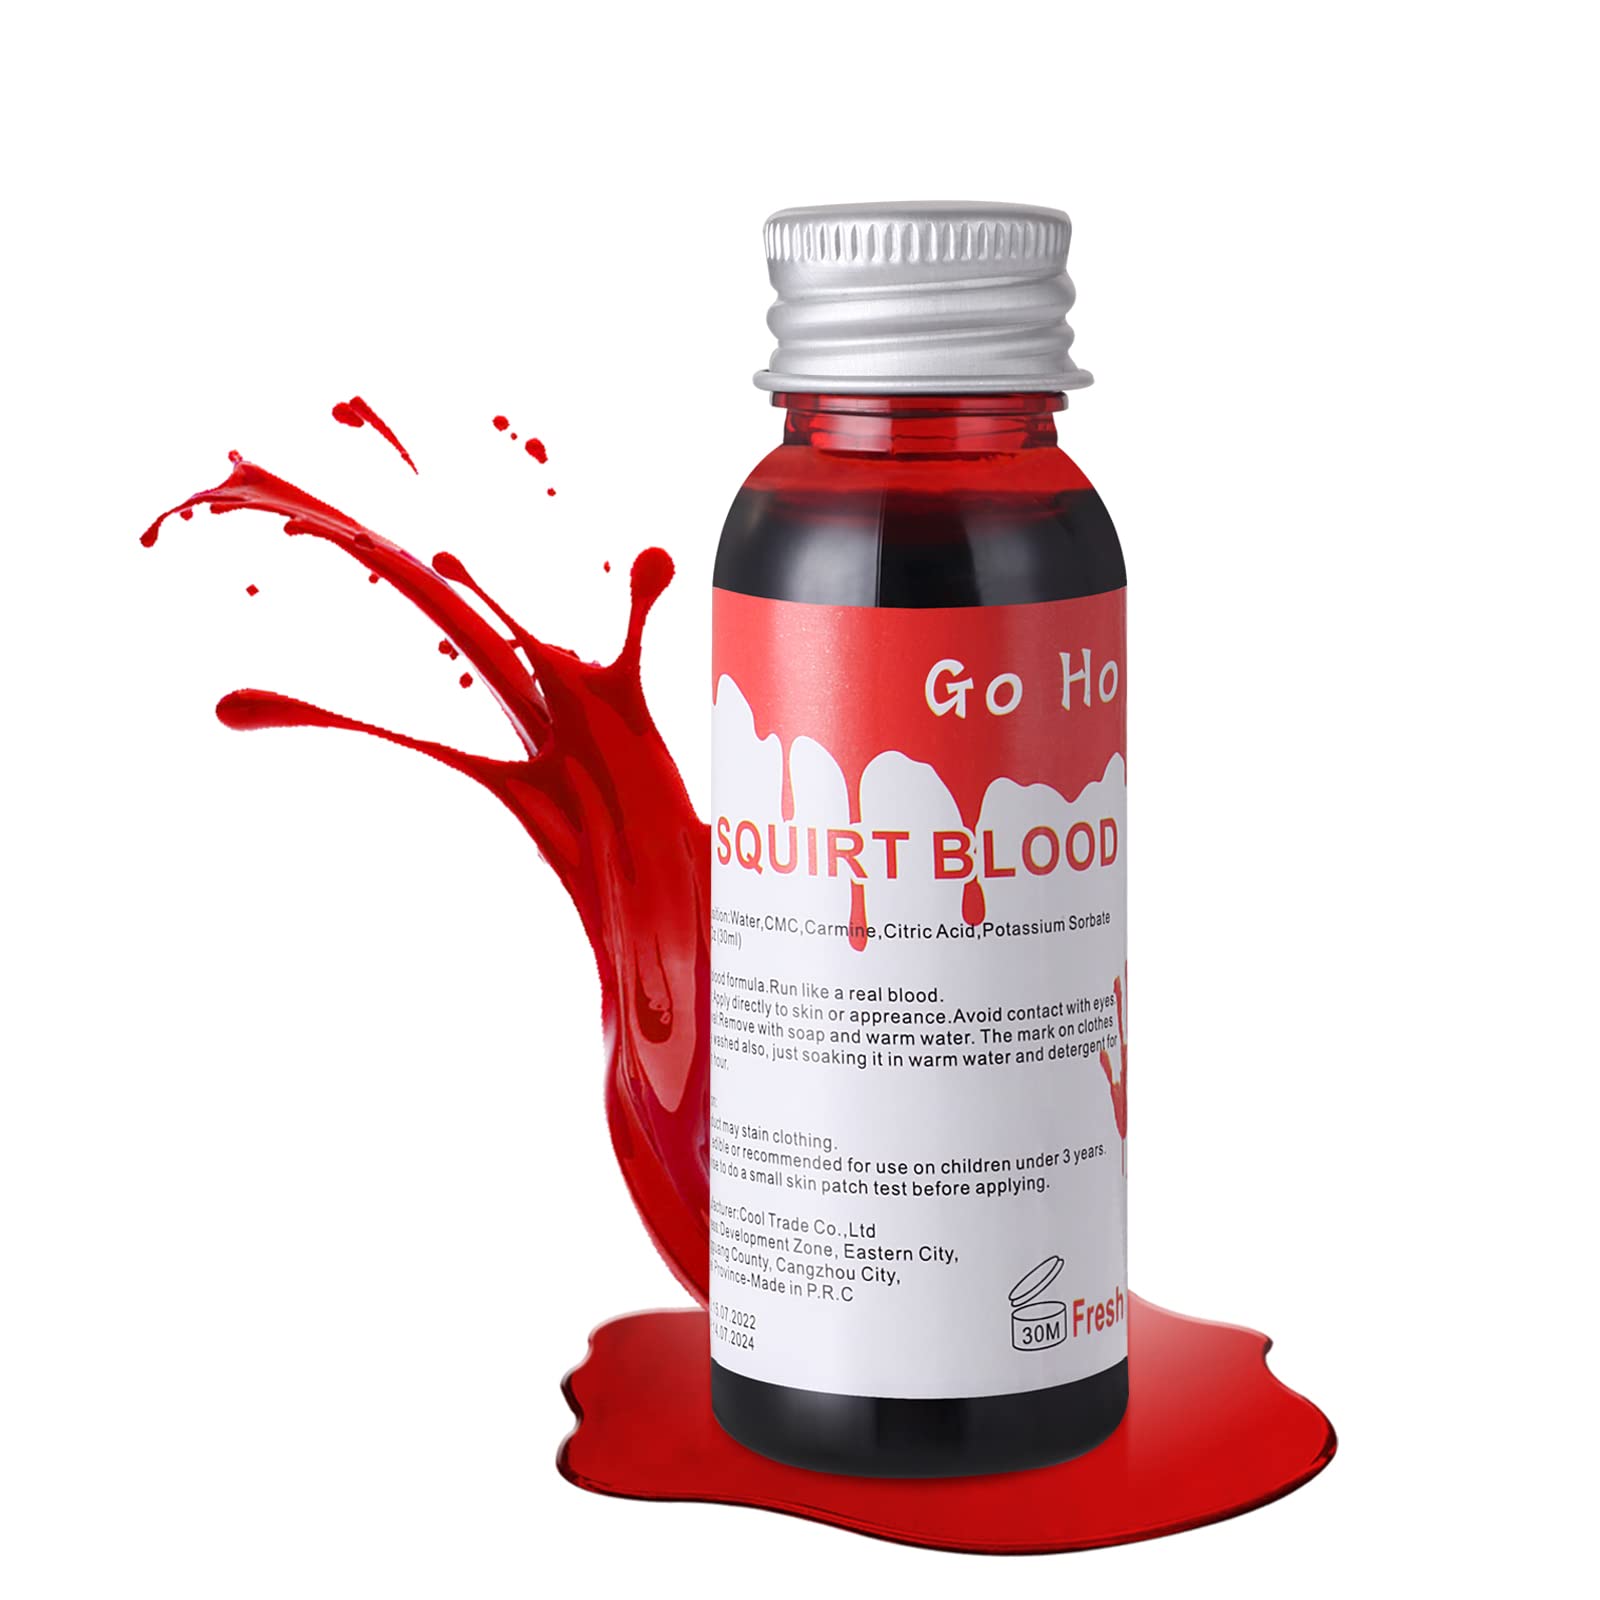 Go Ho Fake Blood Makeup(1 oz),Realistic Effects Fake Blood Washable for Scar Wound and Clothes,Easy Dry Flow Fake Blood for Eyes Drips Nose Bleeds,Halloween Blood for Cosplay SFX Zombie Vampire Special Effects,Fresh